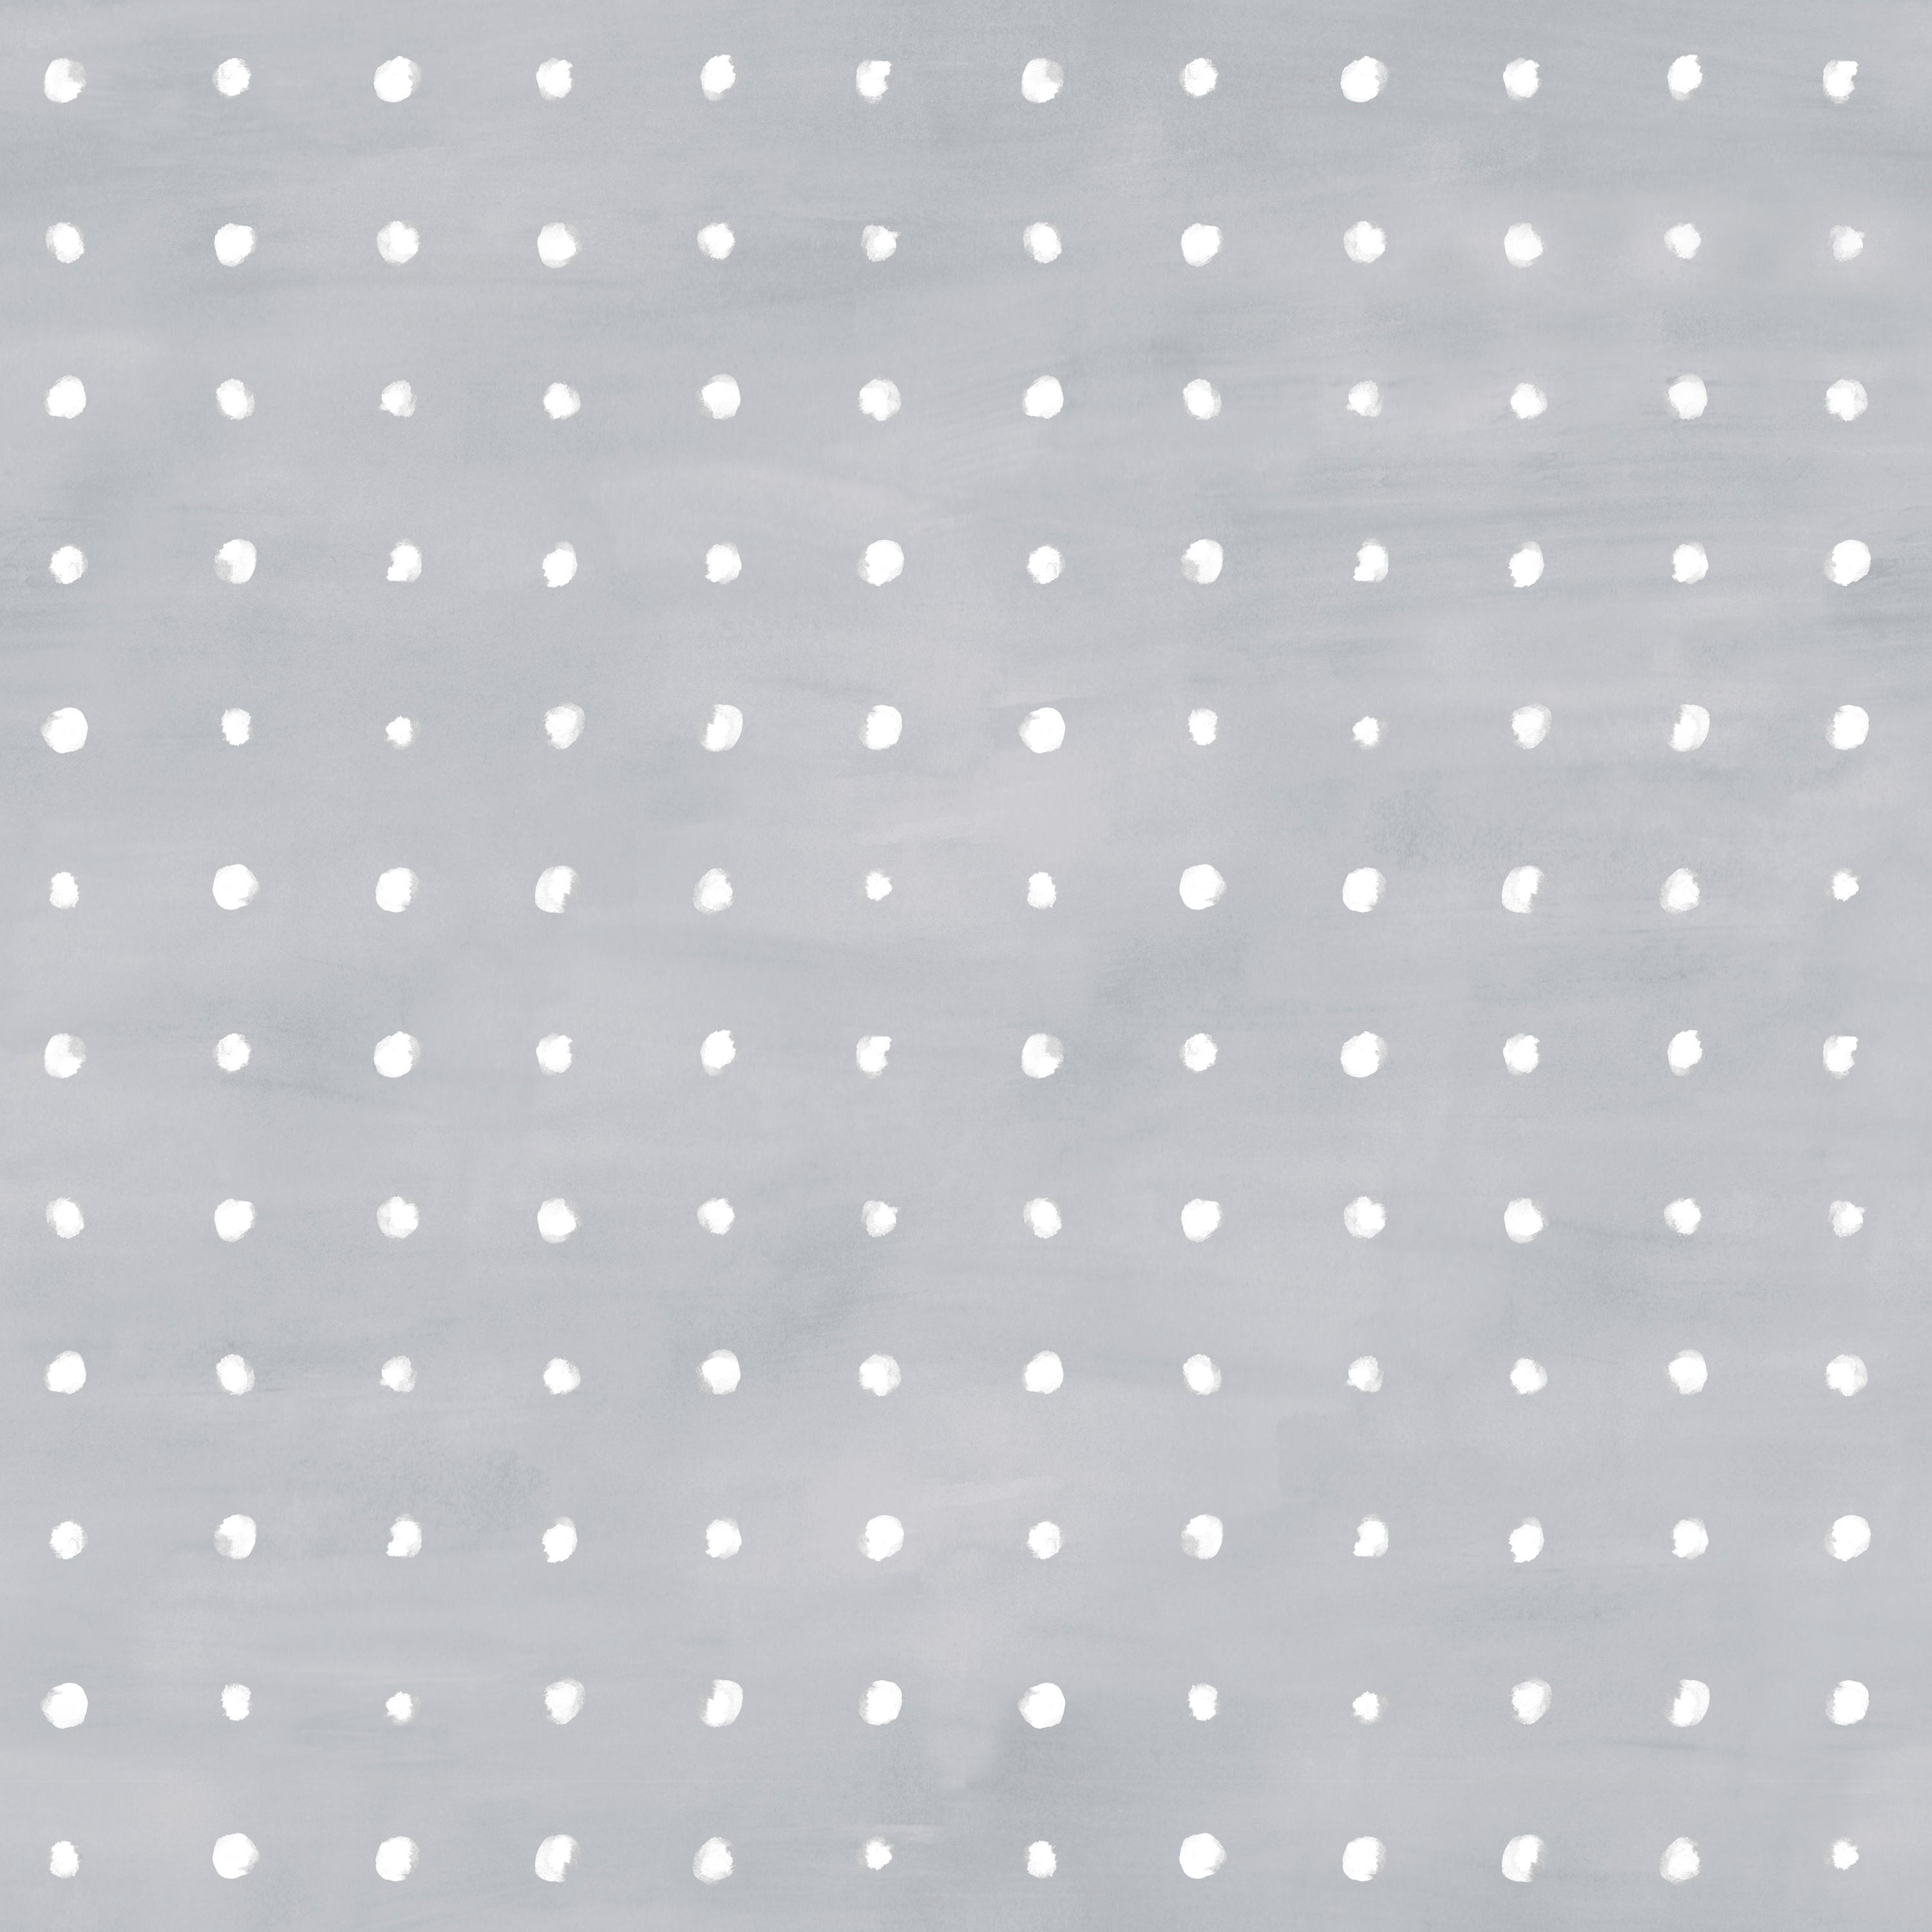 Detail of wallpaper in a dotted grid pattern in white on a light gray field.